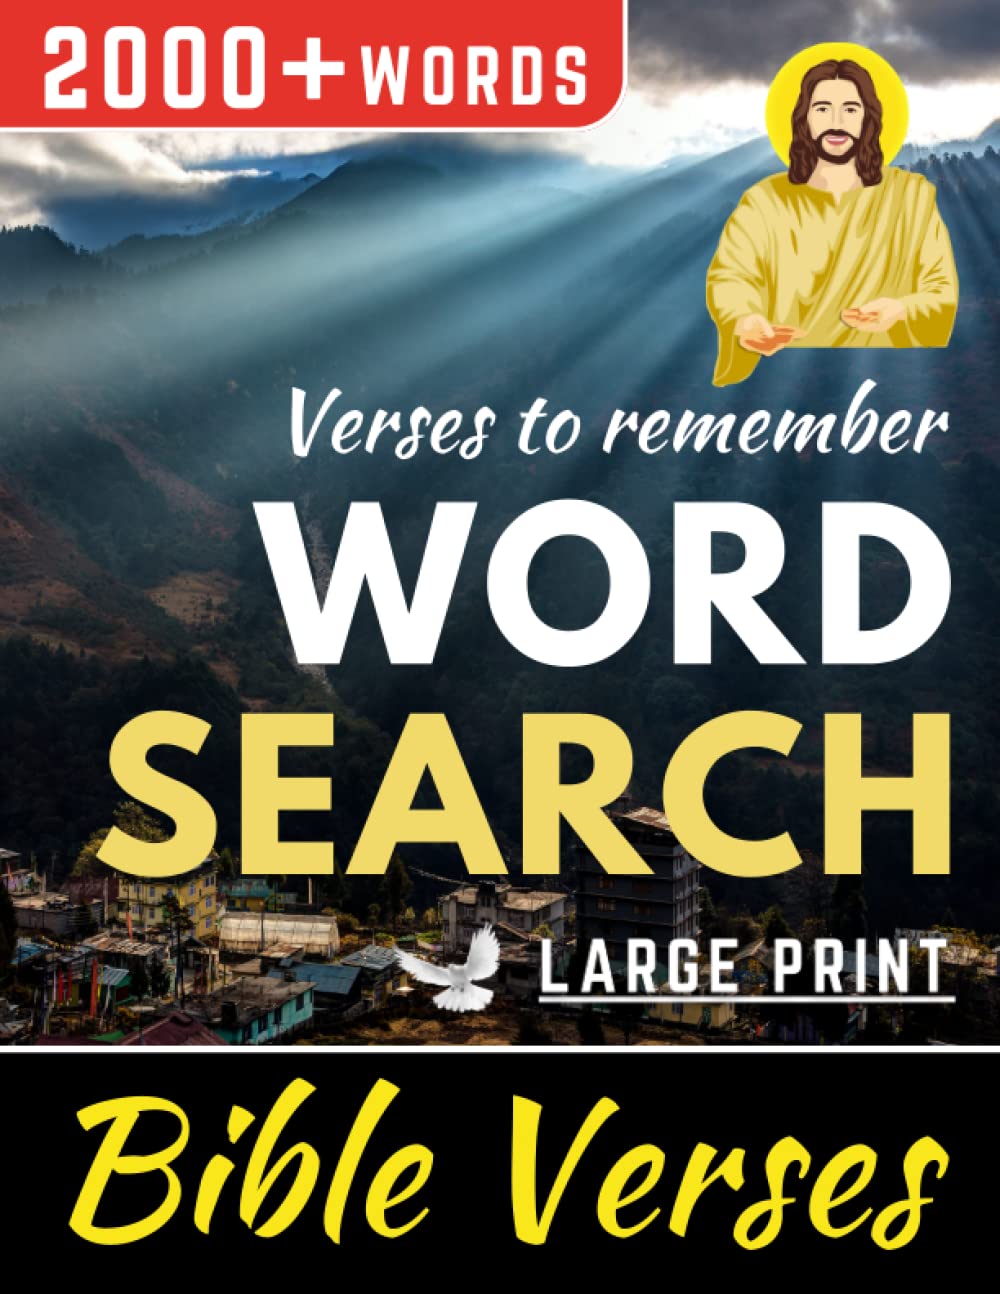 BIBLE VERSE Word Search 2000+ Words for Adults and Seniors. LARGE PRINT: This gift will keep your mind active and feed it with positive thoughts. Relaxing Big Font Word find Puzzles (Wordsearch Book)